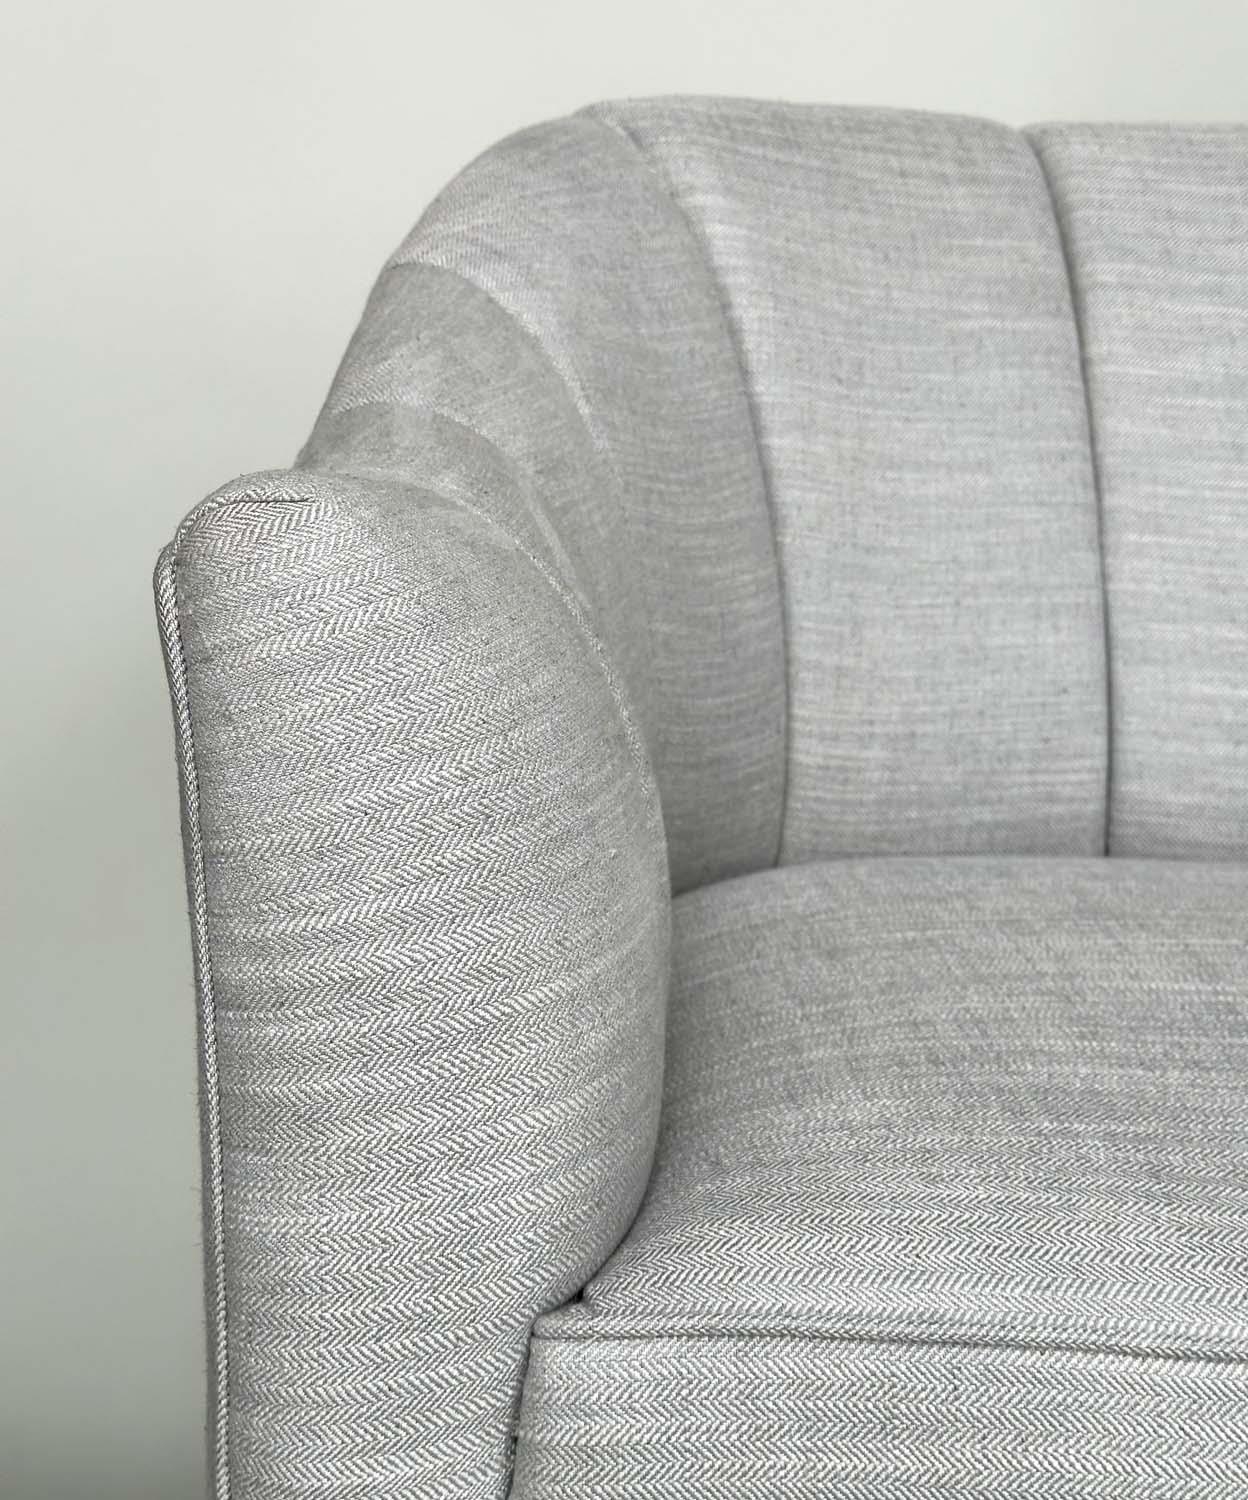 BRAY DESIGN SOFA, ribbed curved back and out swept supports, in Sahco Flint fabric upholstery, 210cm - Image 7 of 11